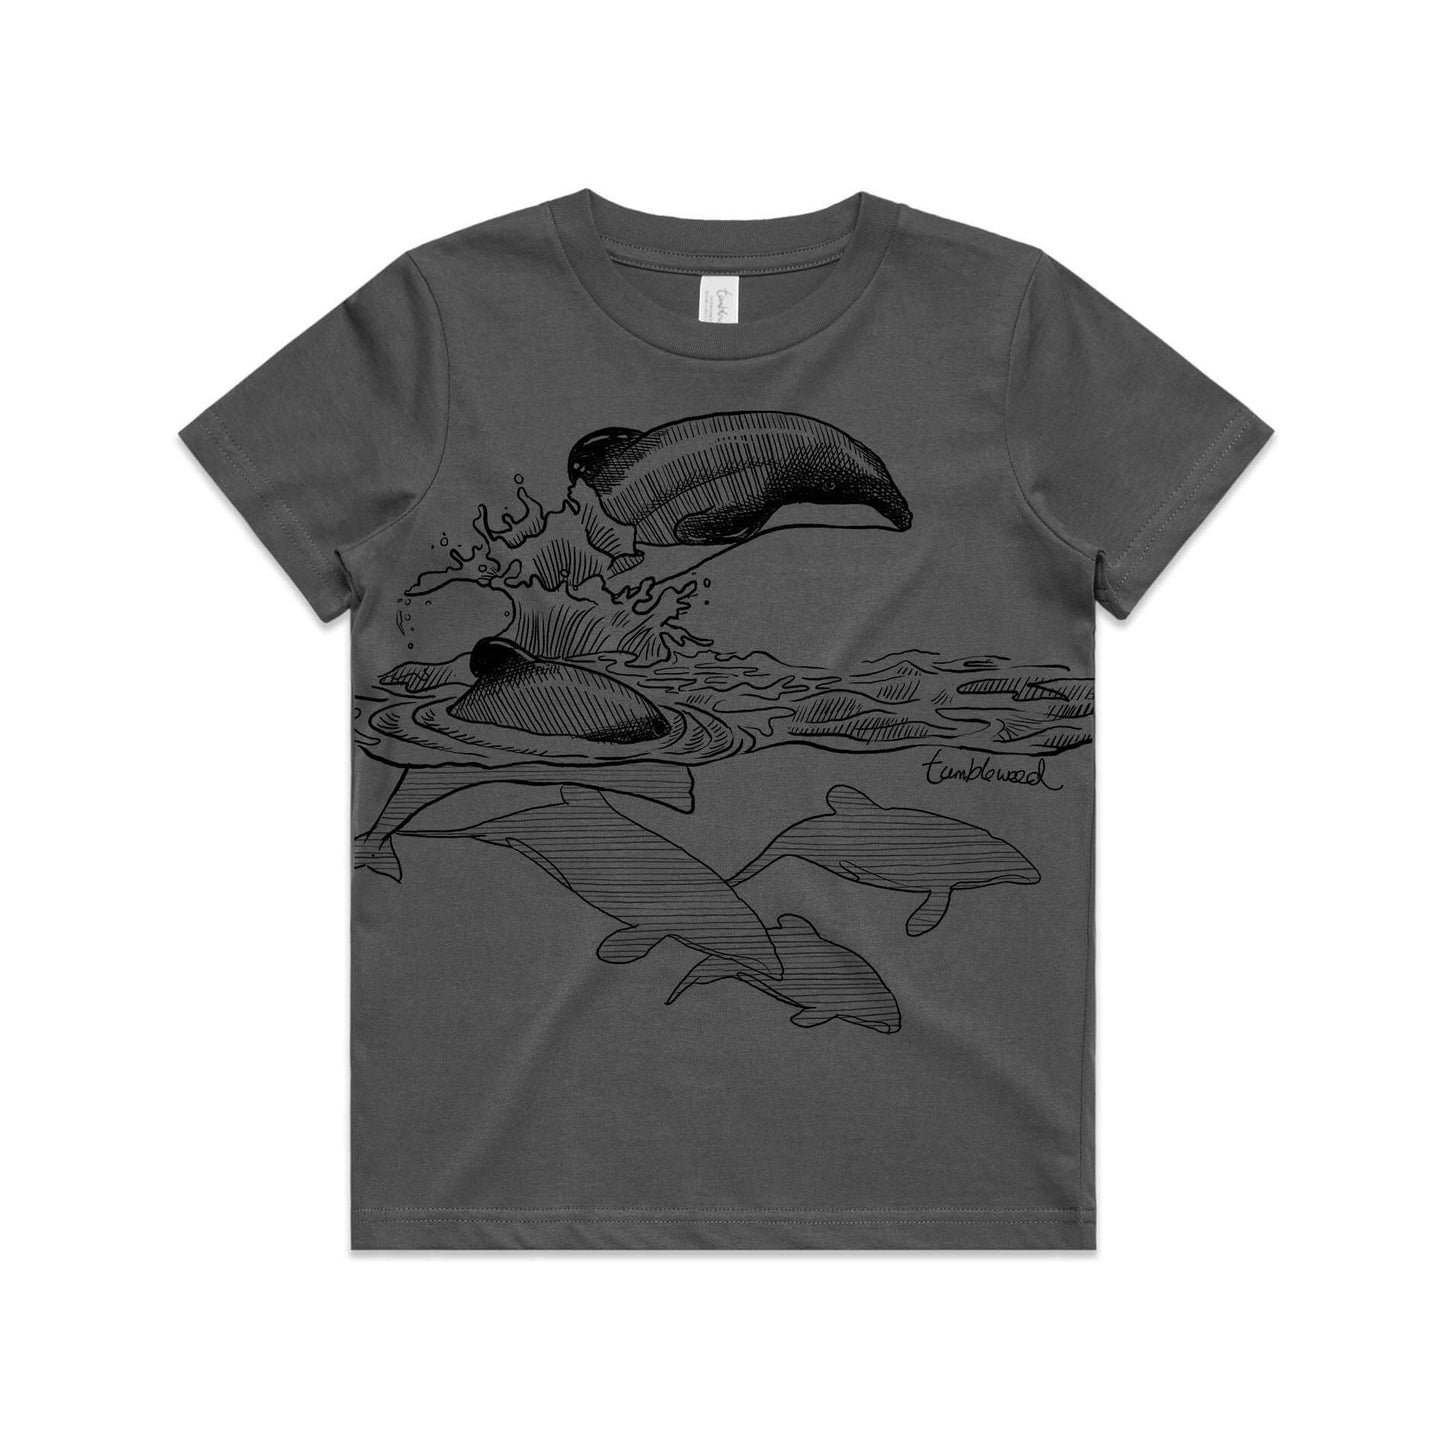 Charcoal, cotton kids' t-shirt with screen printed ducks maui dolphin design.